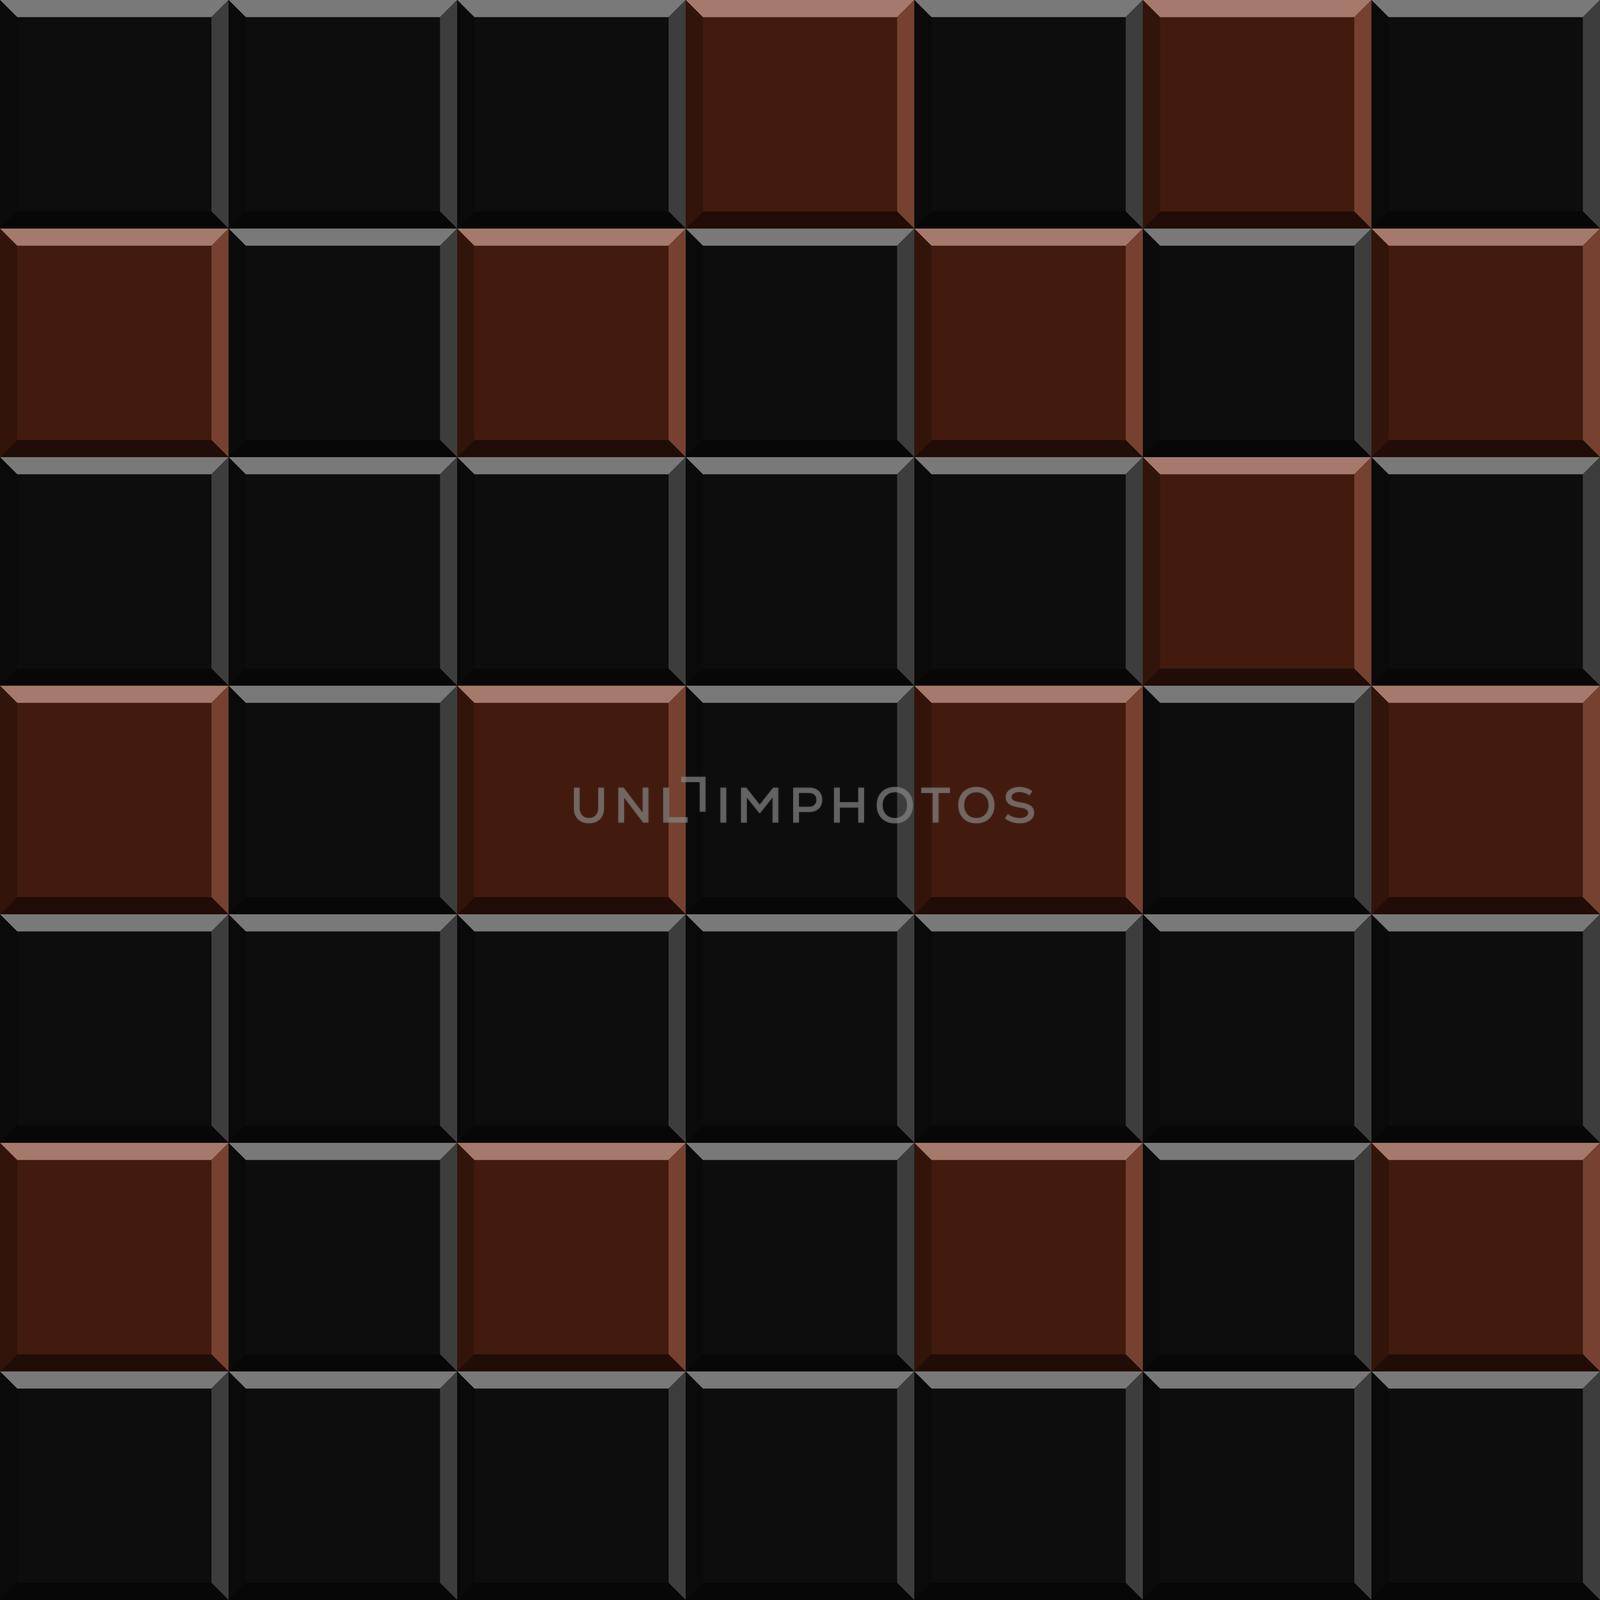 Black and red bricks pattern design solid sheet of wallpaper. Concept of home decor and interior designing